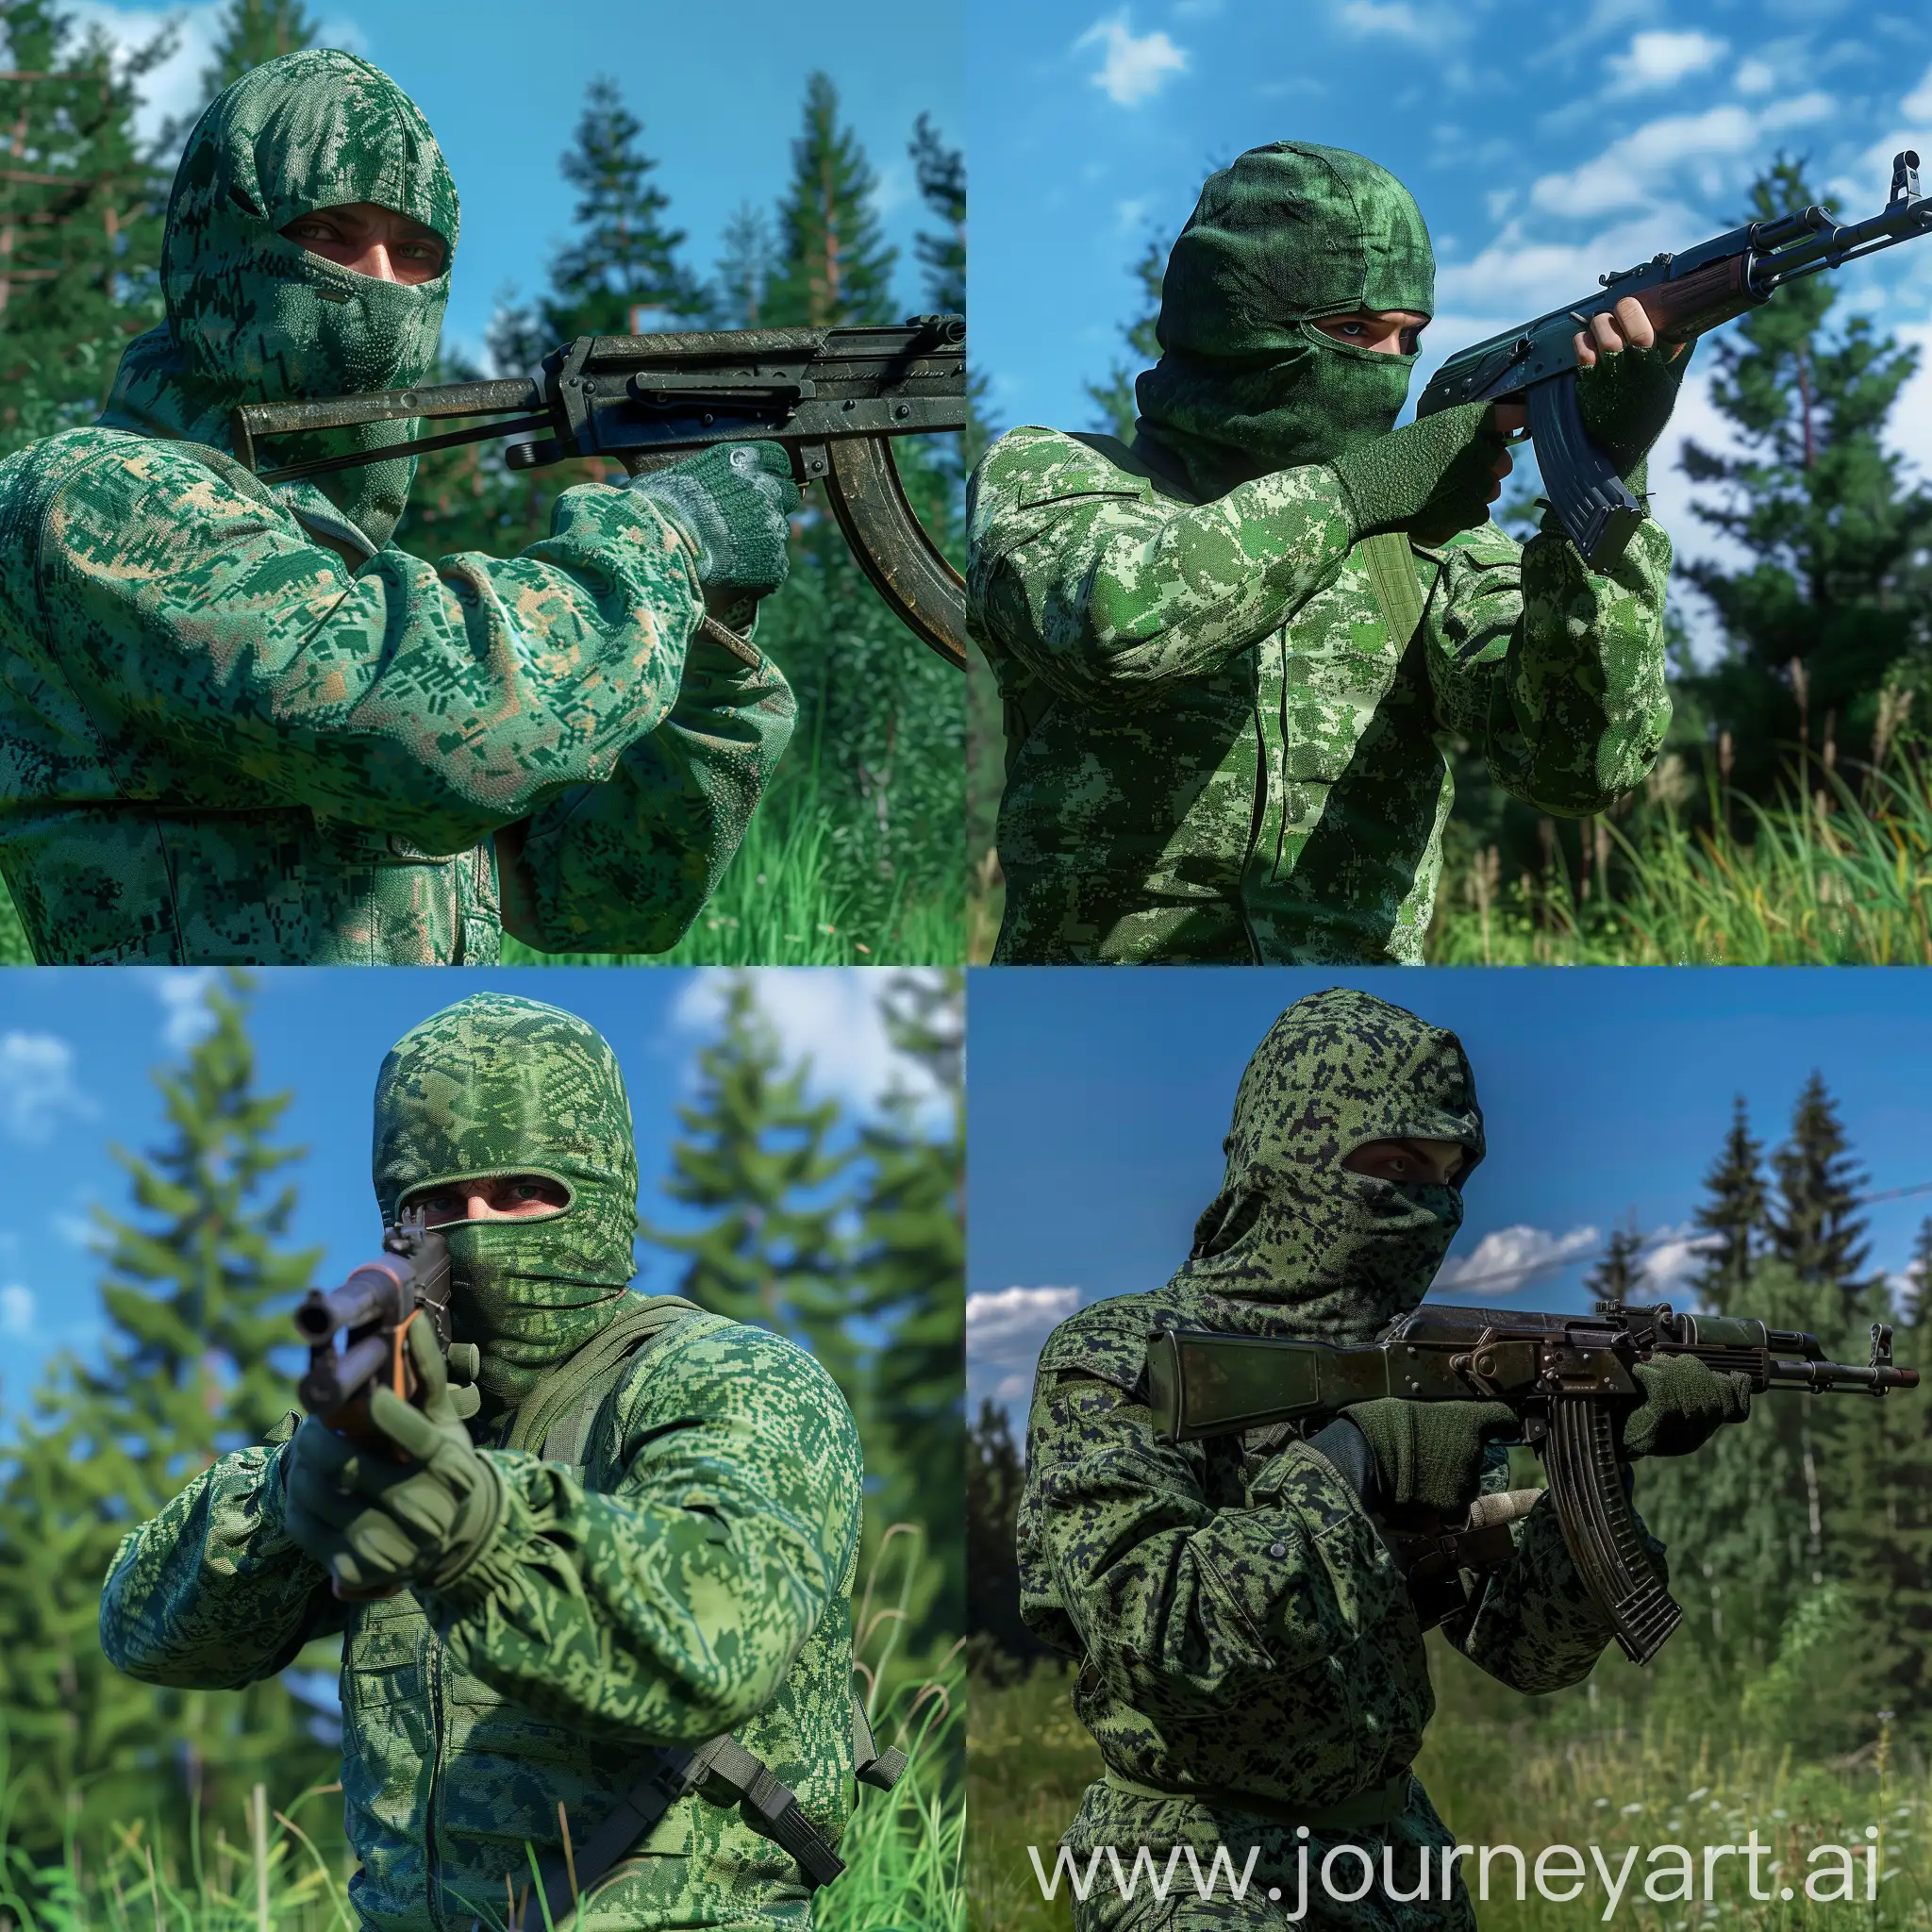 Camouflaged-Soldier-with-Machine-Gun-in-Forest-Setting